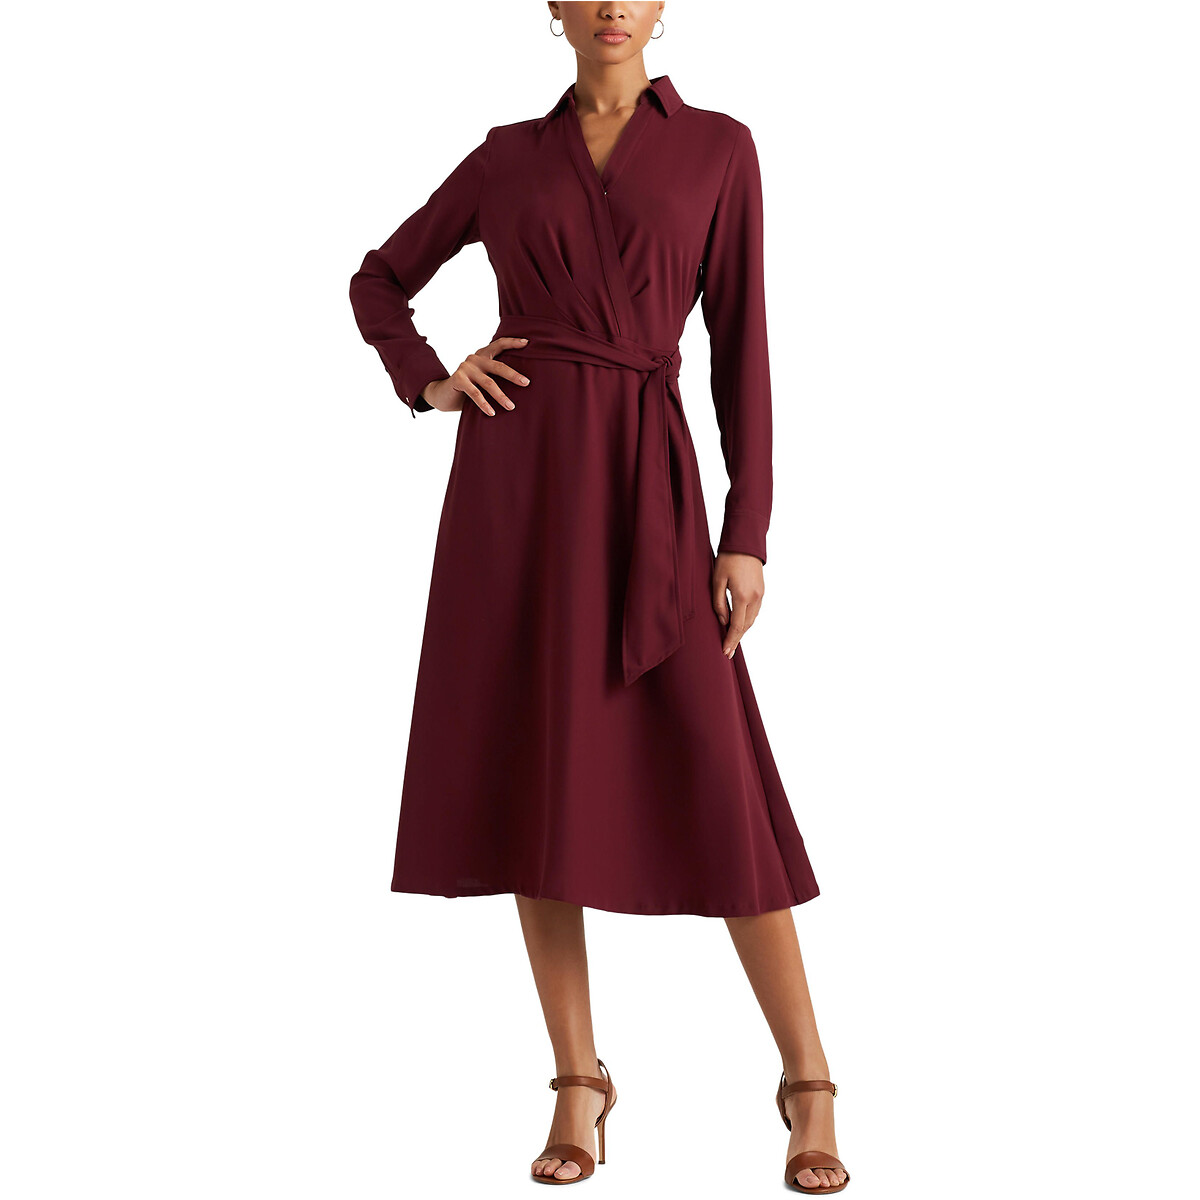 Rowella Wrapover Dress with Long Sleeves